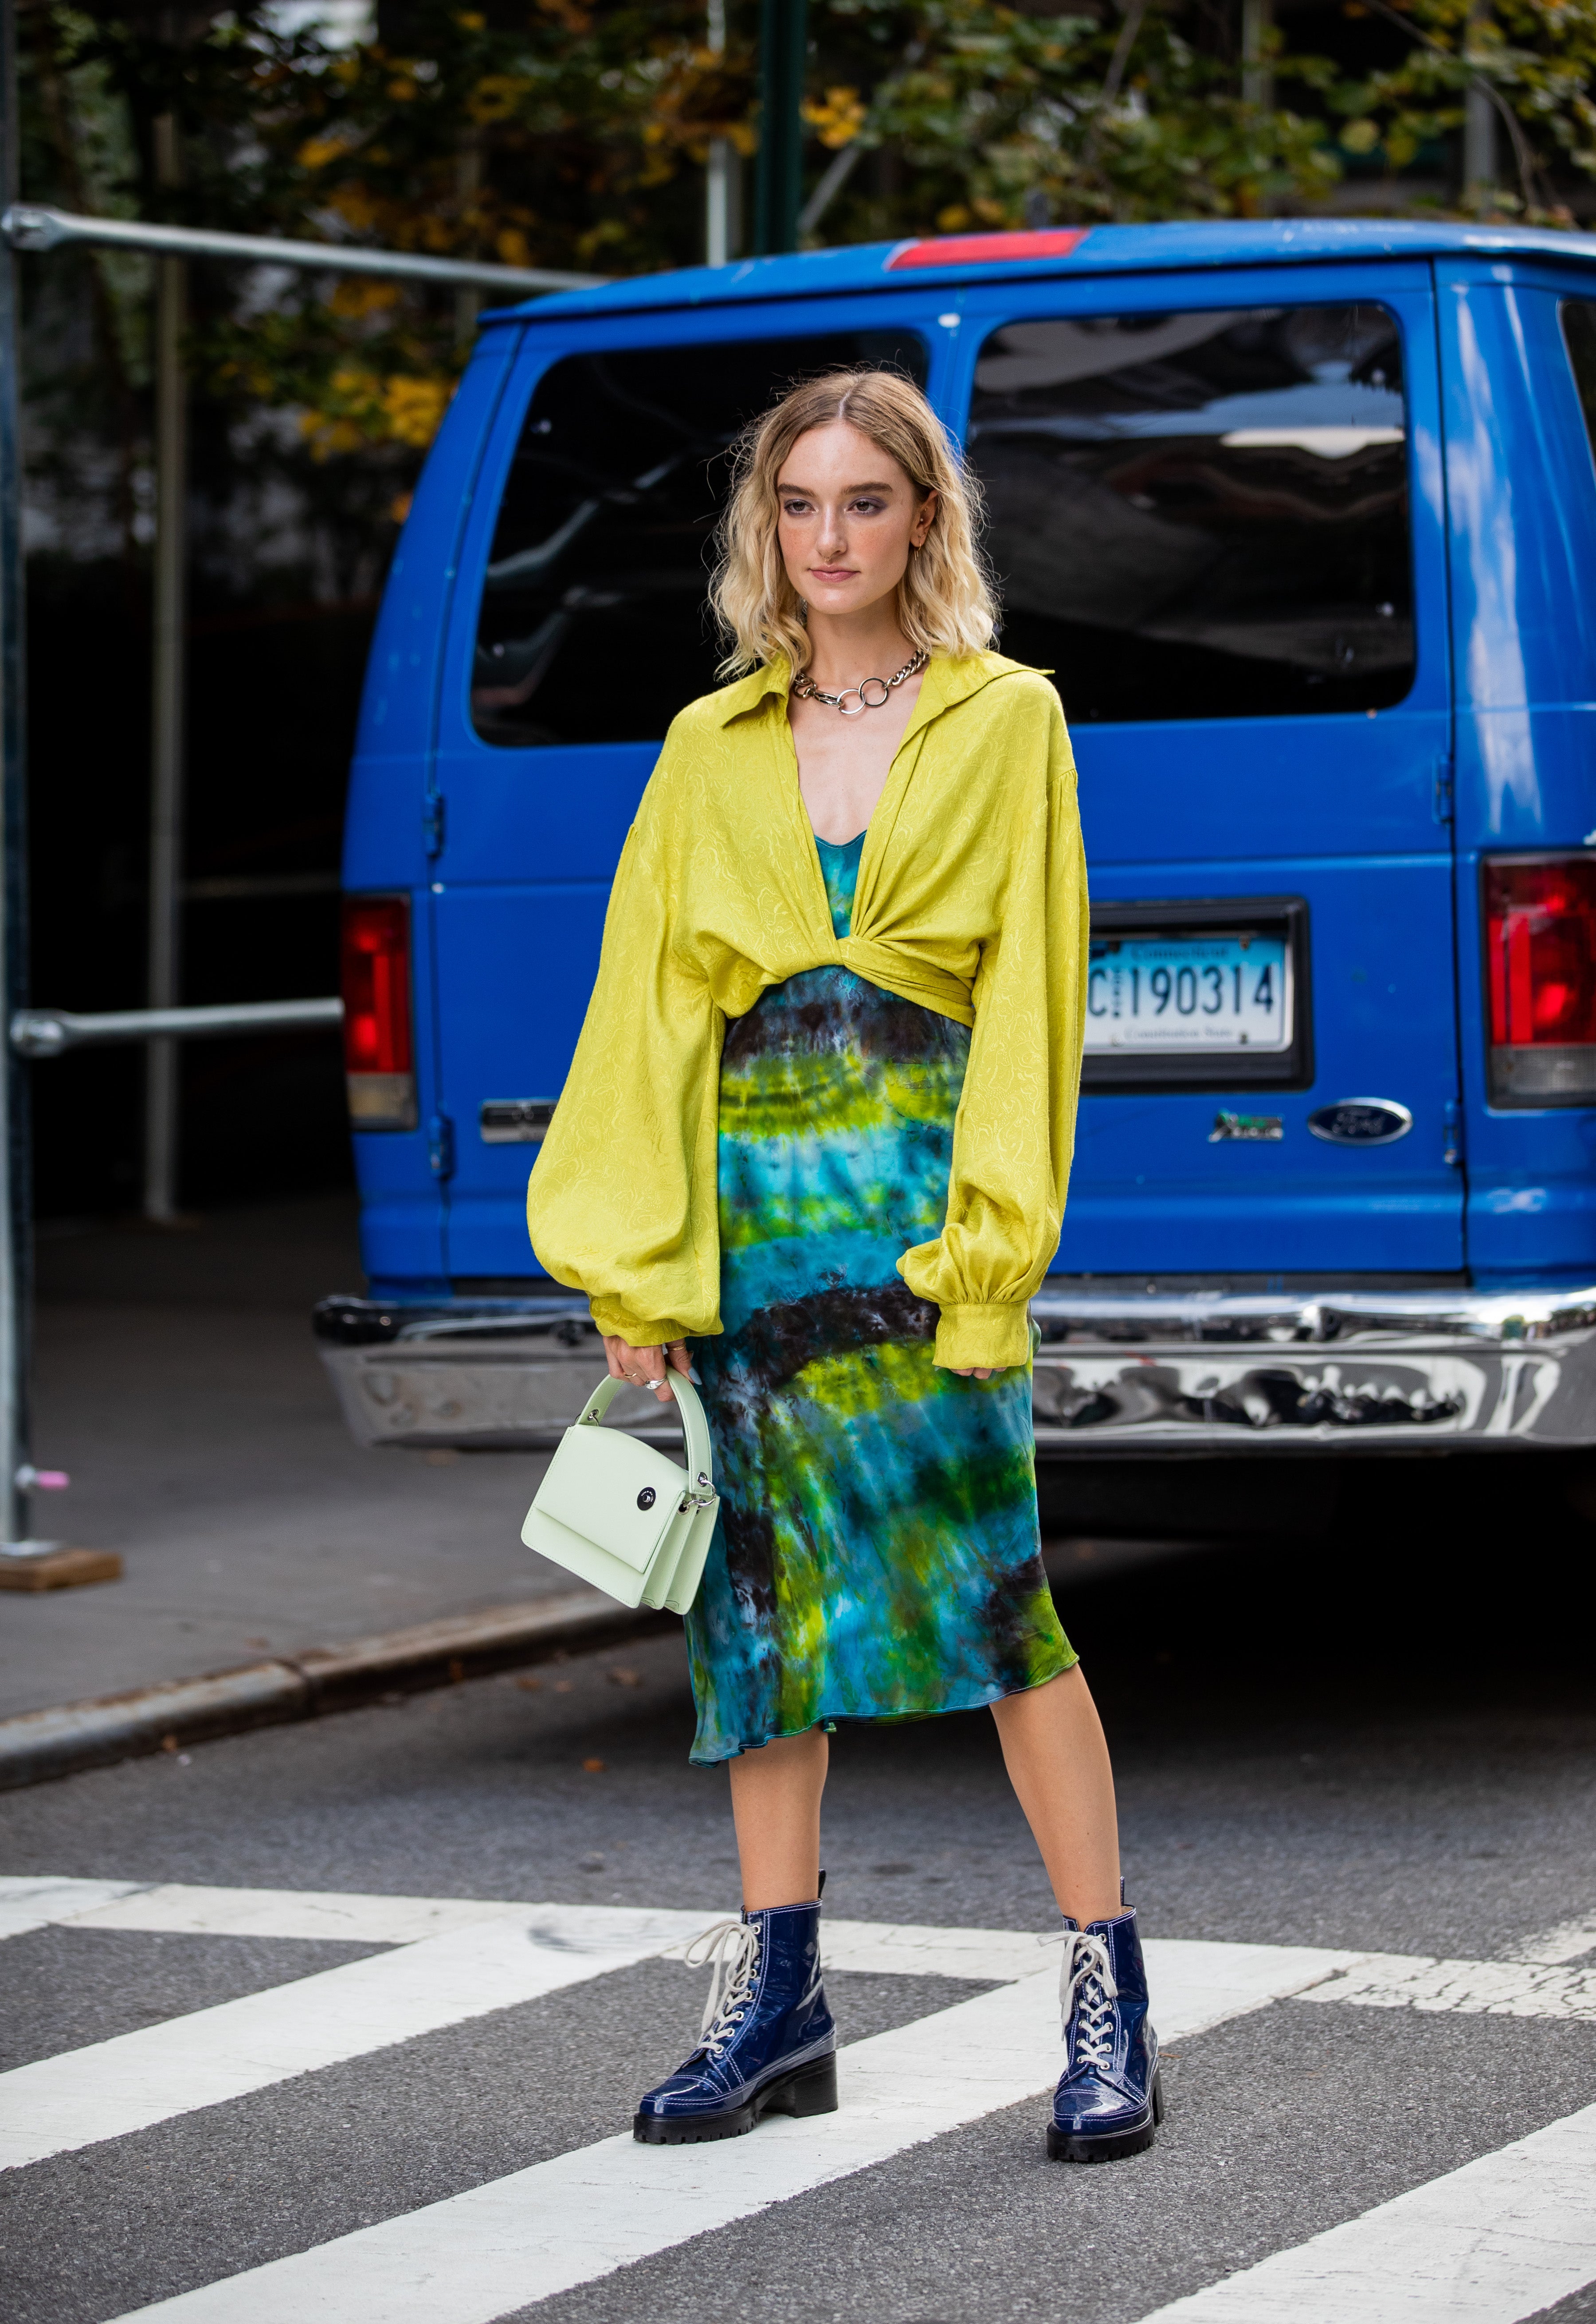 168 Hours of New York Fashion Week, as Told by WWW Editors